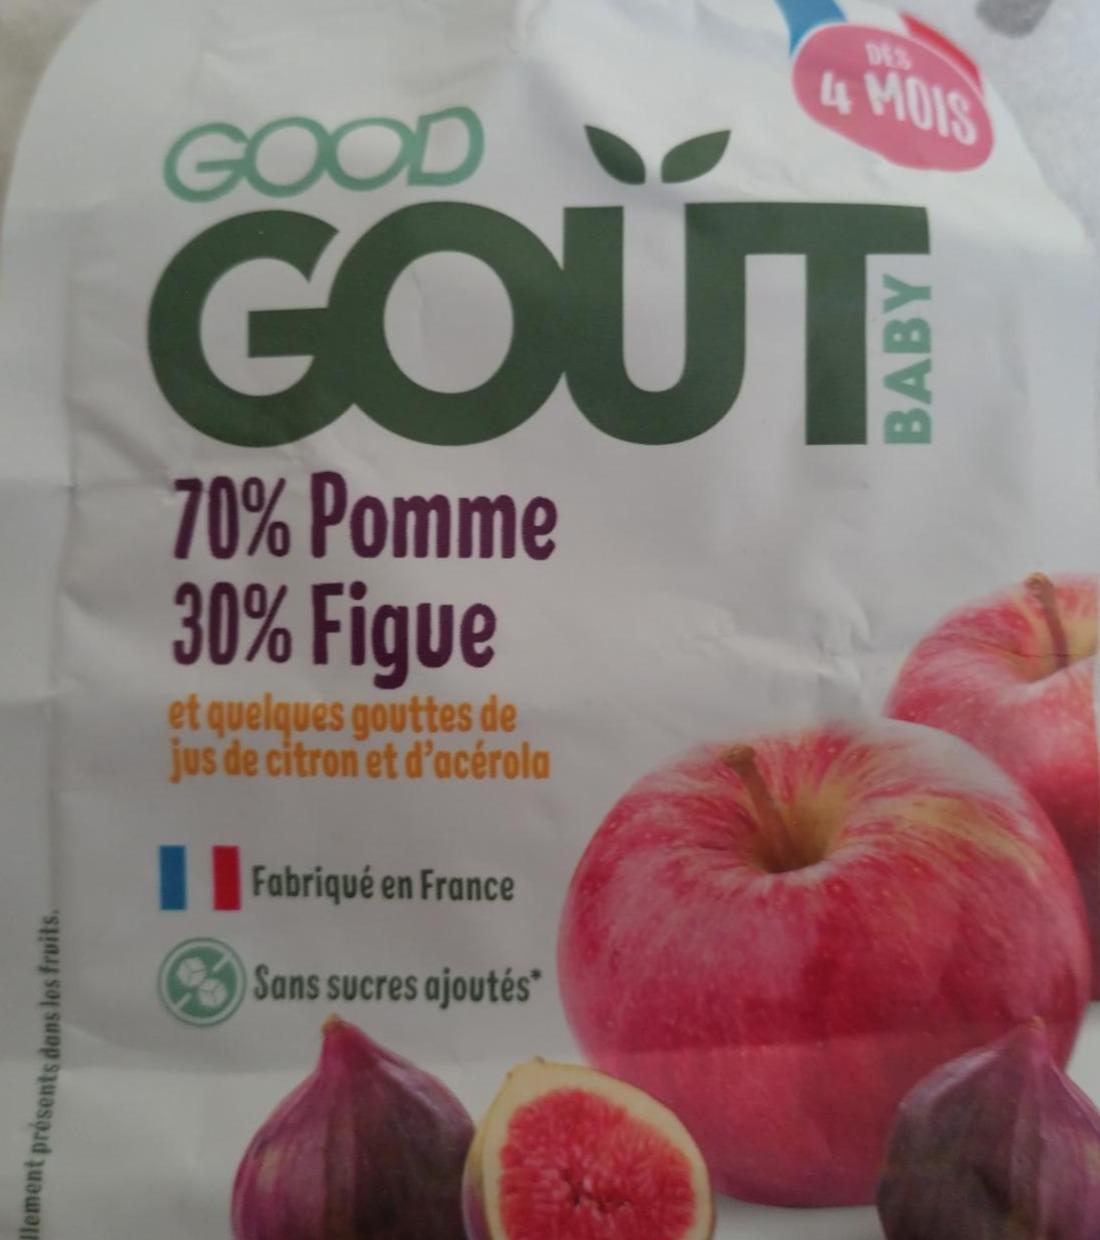 Фото - Pomme Figue Good Gout